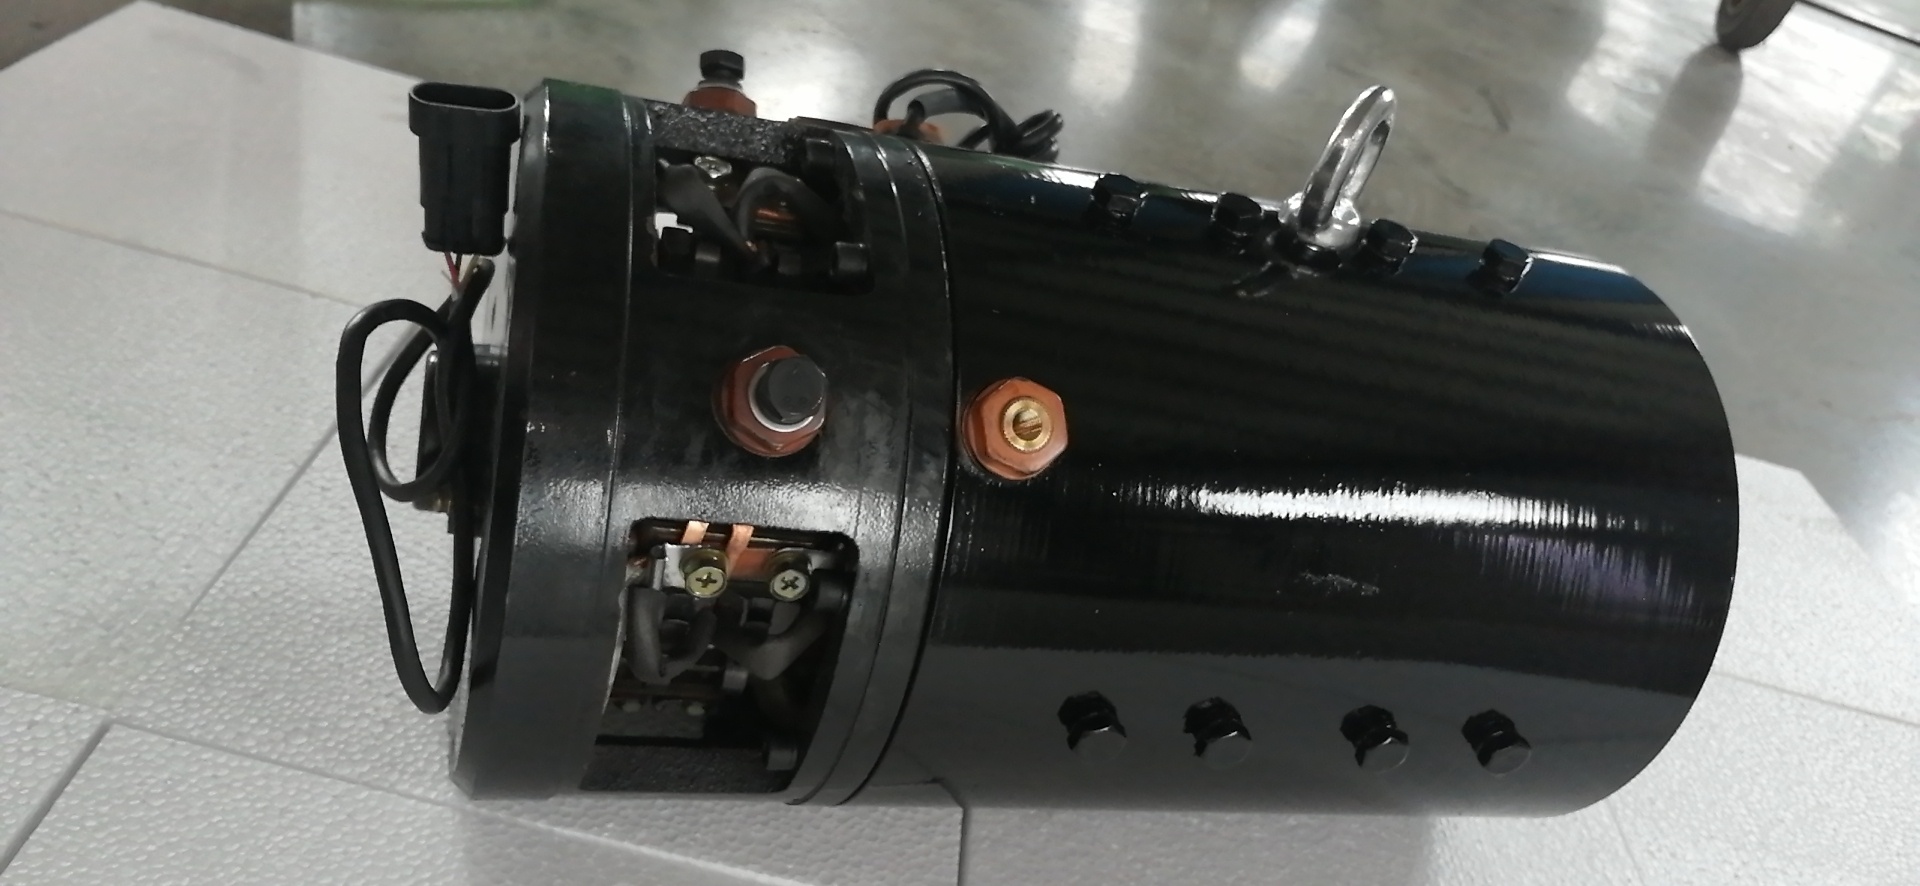 6.3KW96V2800rpm series excited DC motor